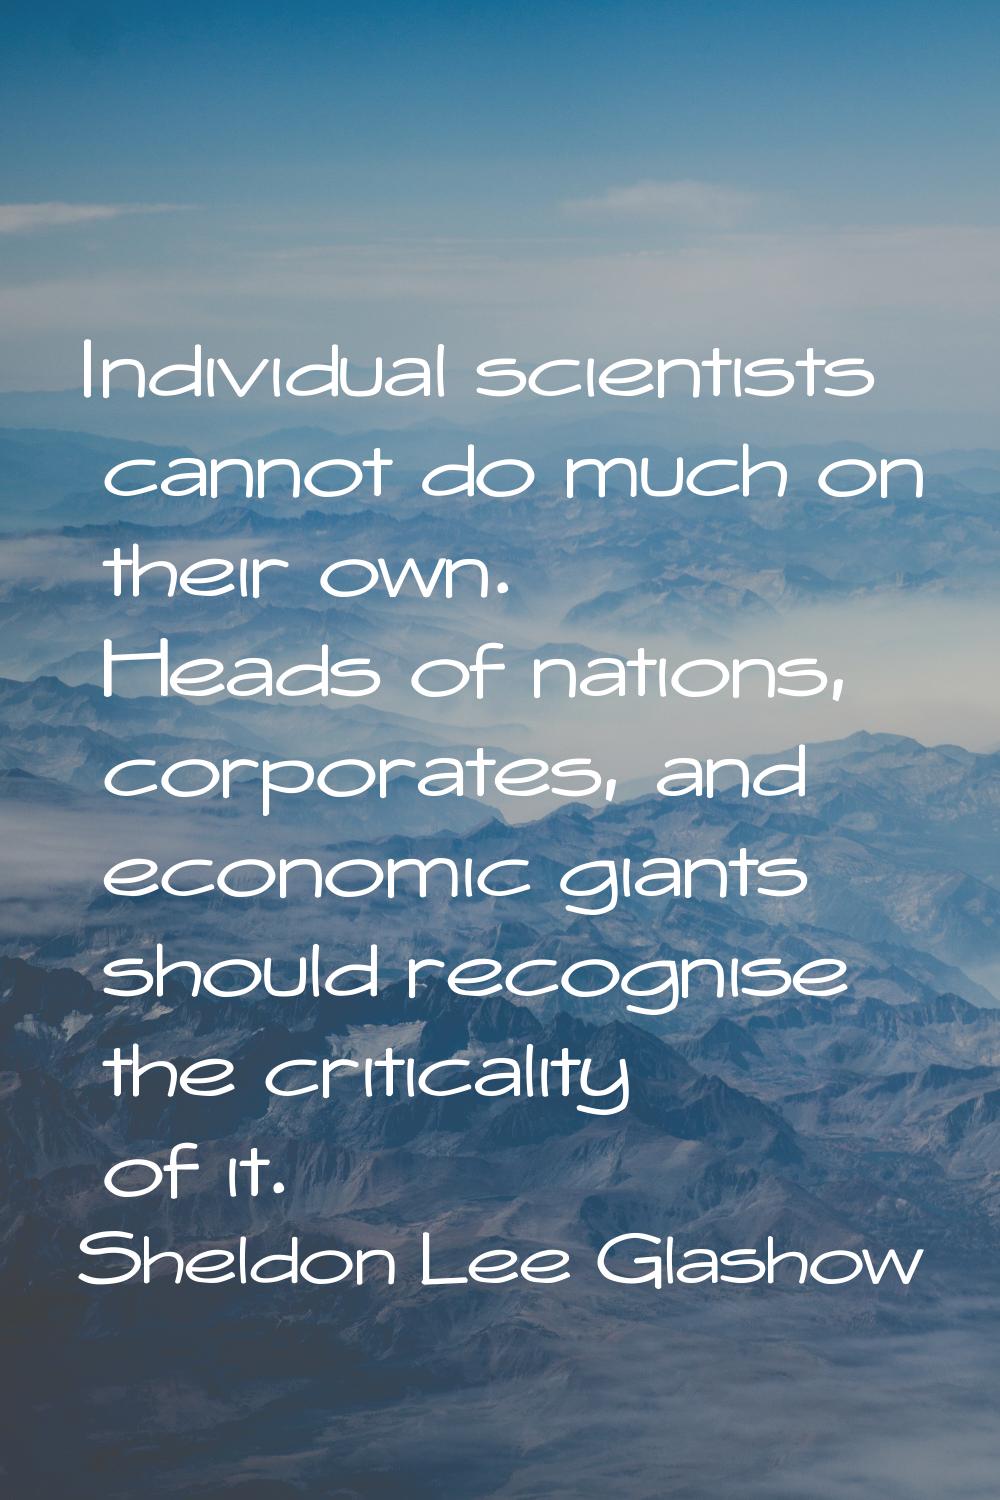 Individual scientists cannot do much on their own. Heads of nations, corporates, and economic giant